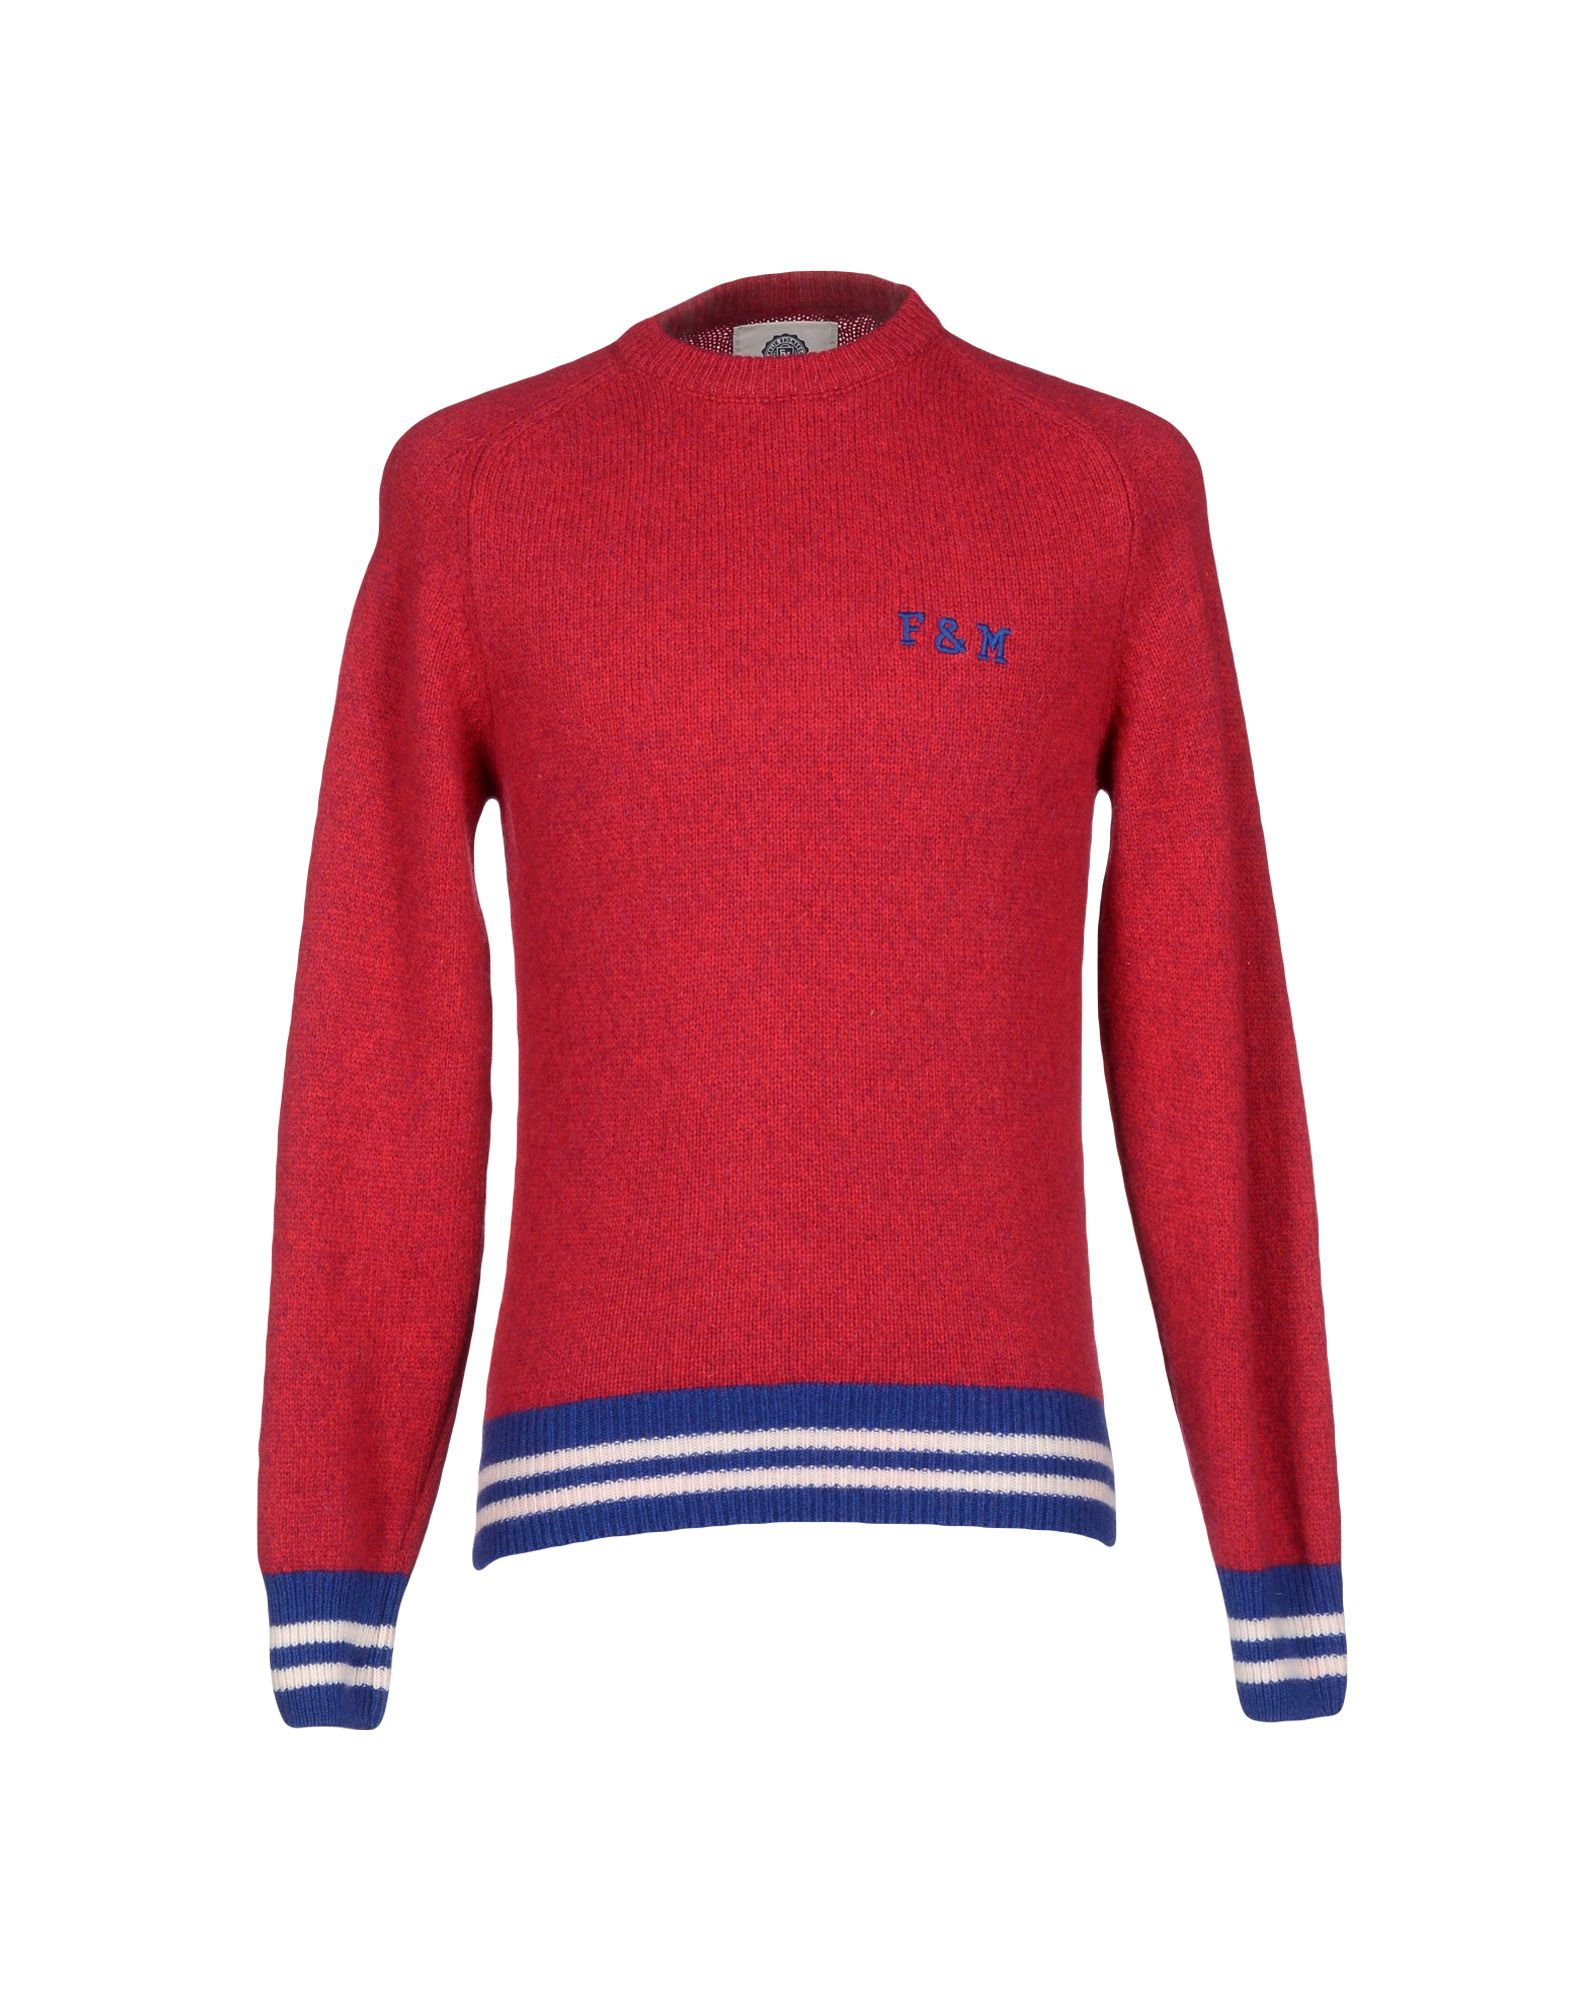 Franklin & Marshall Wool Sweater in Red for Men - Lyst